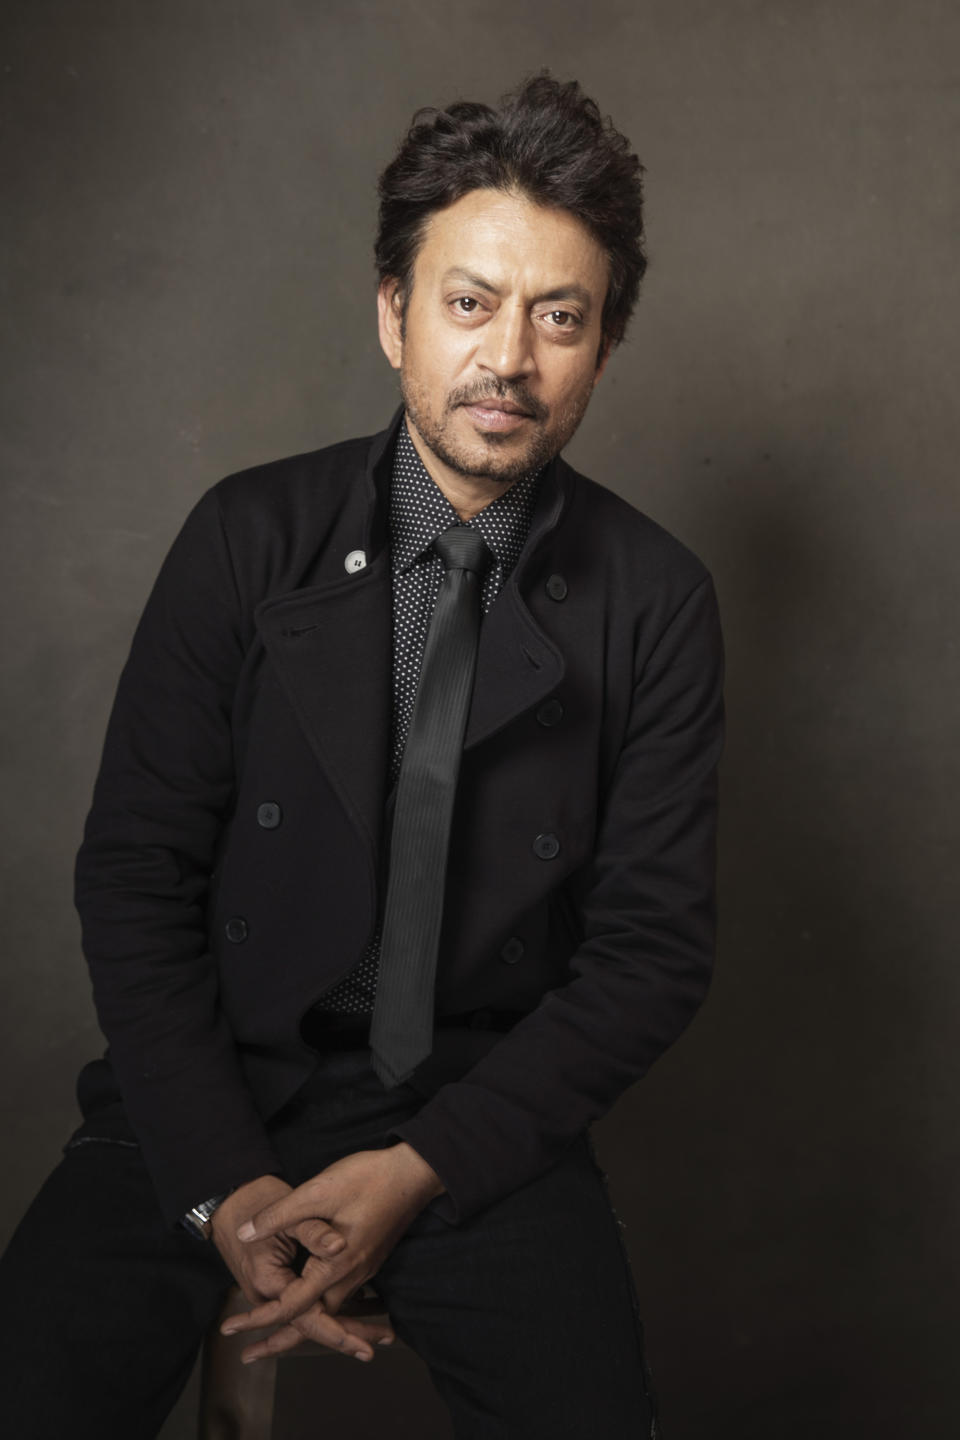 Irrfan Khan poses for a portrait at Quaker Good Energy Lodge with GenArt and the Collective, during the Sundance Film Festival, on Monday, Jan. 20, 2014 in Park City, Utah. (Photo by Victoria Will/Invision/AP)